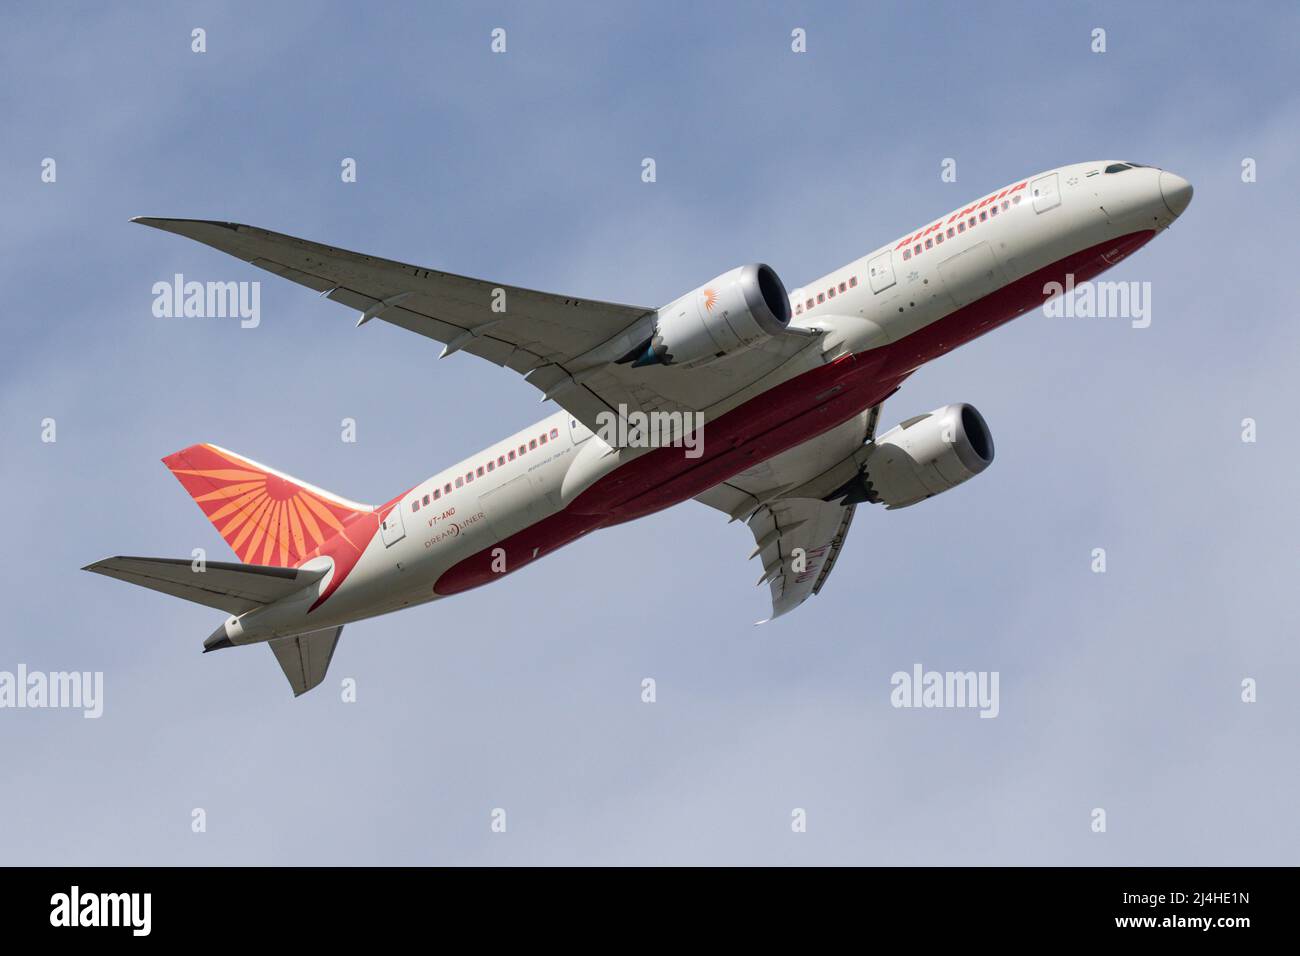 A Boeing 787 operated by Air India departs from London Heathrow Airport Stock Photo